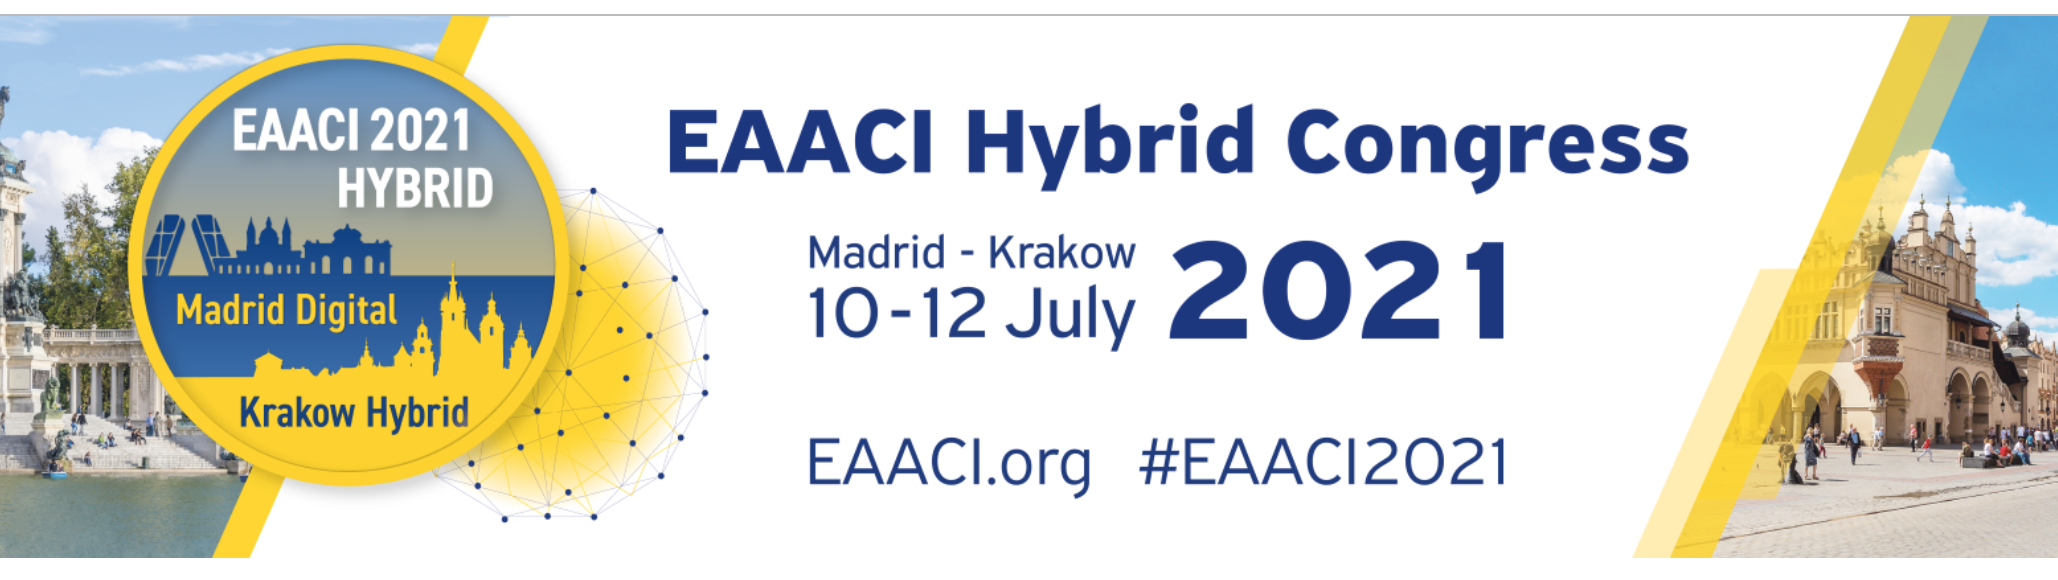 European Academy of Allergy and Clinical Immunology Annual Congress EAACI 2021